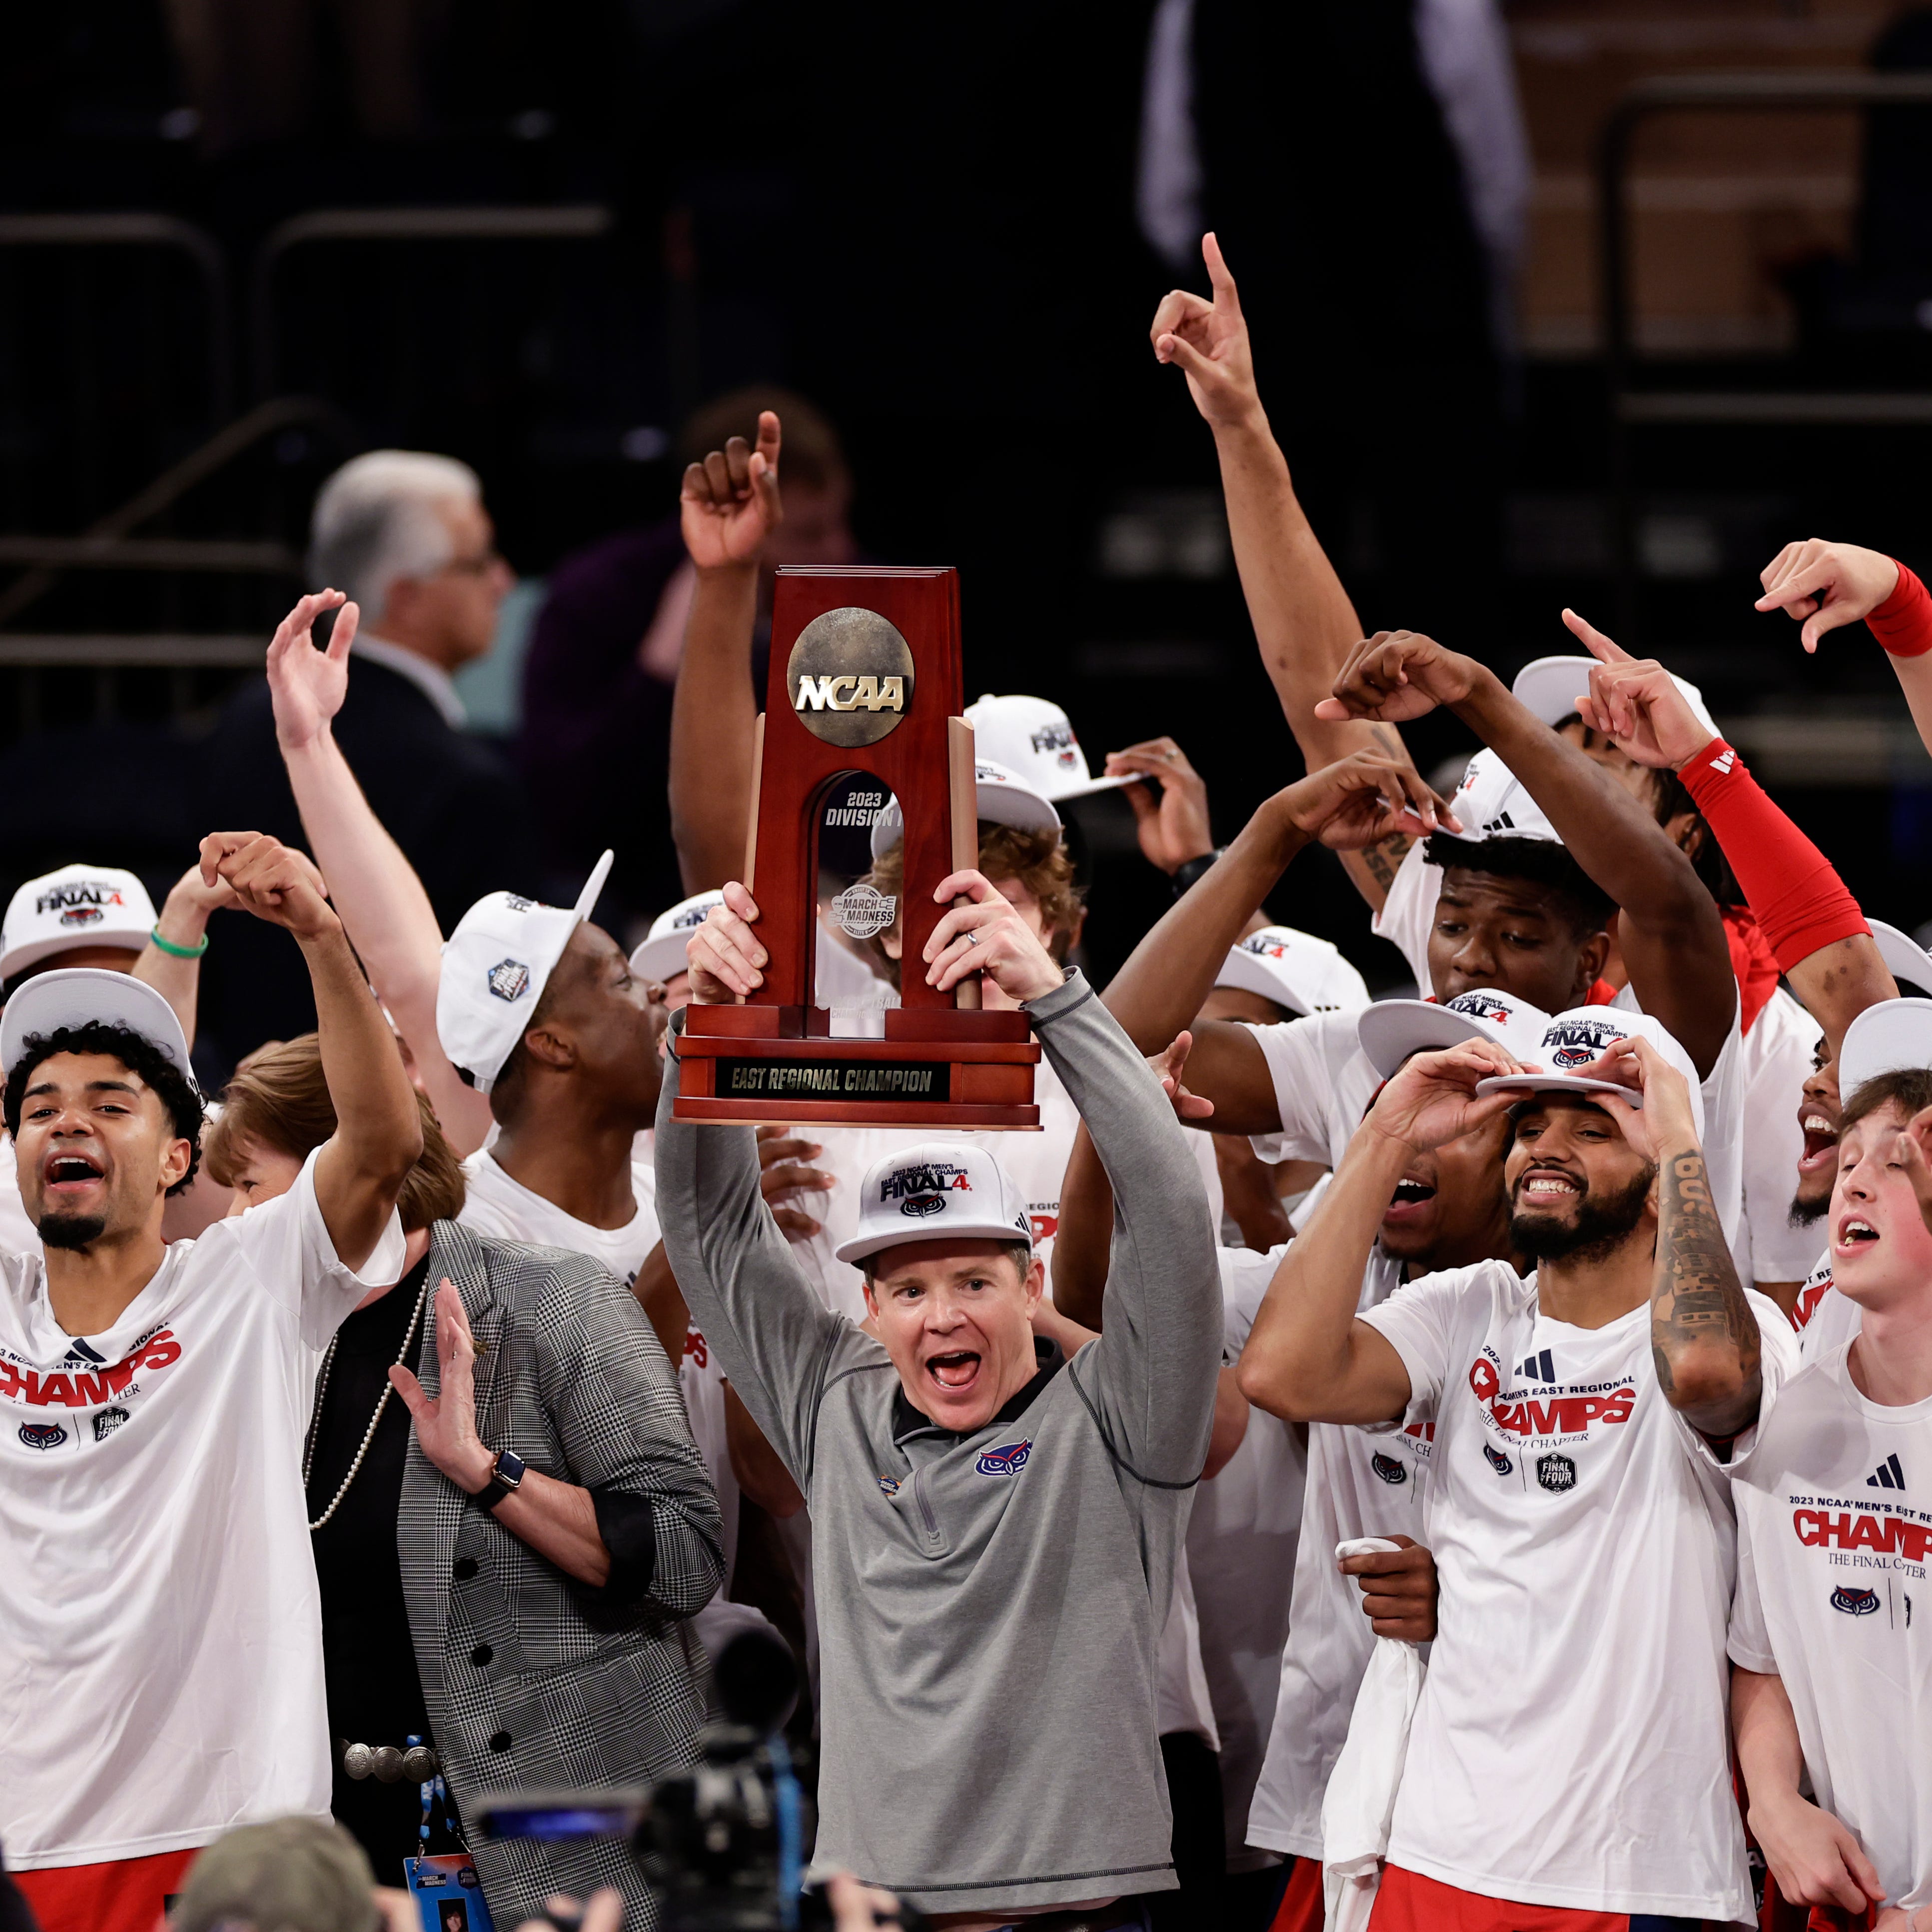 Florida Atlantic head coach Dusty May holds up the trophy as Florida Atlantic players celebrate after defeating Kansas State in the second half of an Elite 8 college basketball game in the NCAA Tournament's East Region final, Saturday, March 25, 2023, in New York. (AP Photo/Adam Hunger)